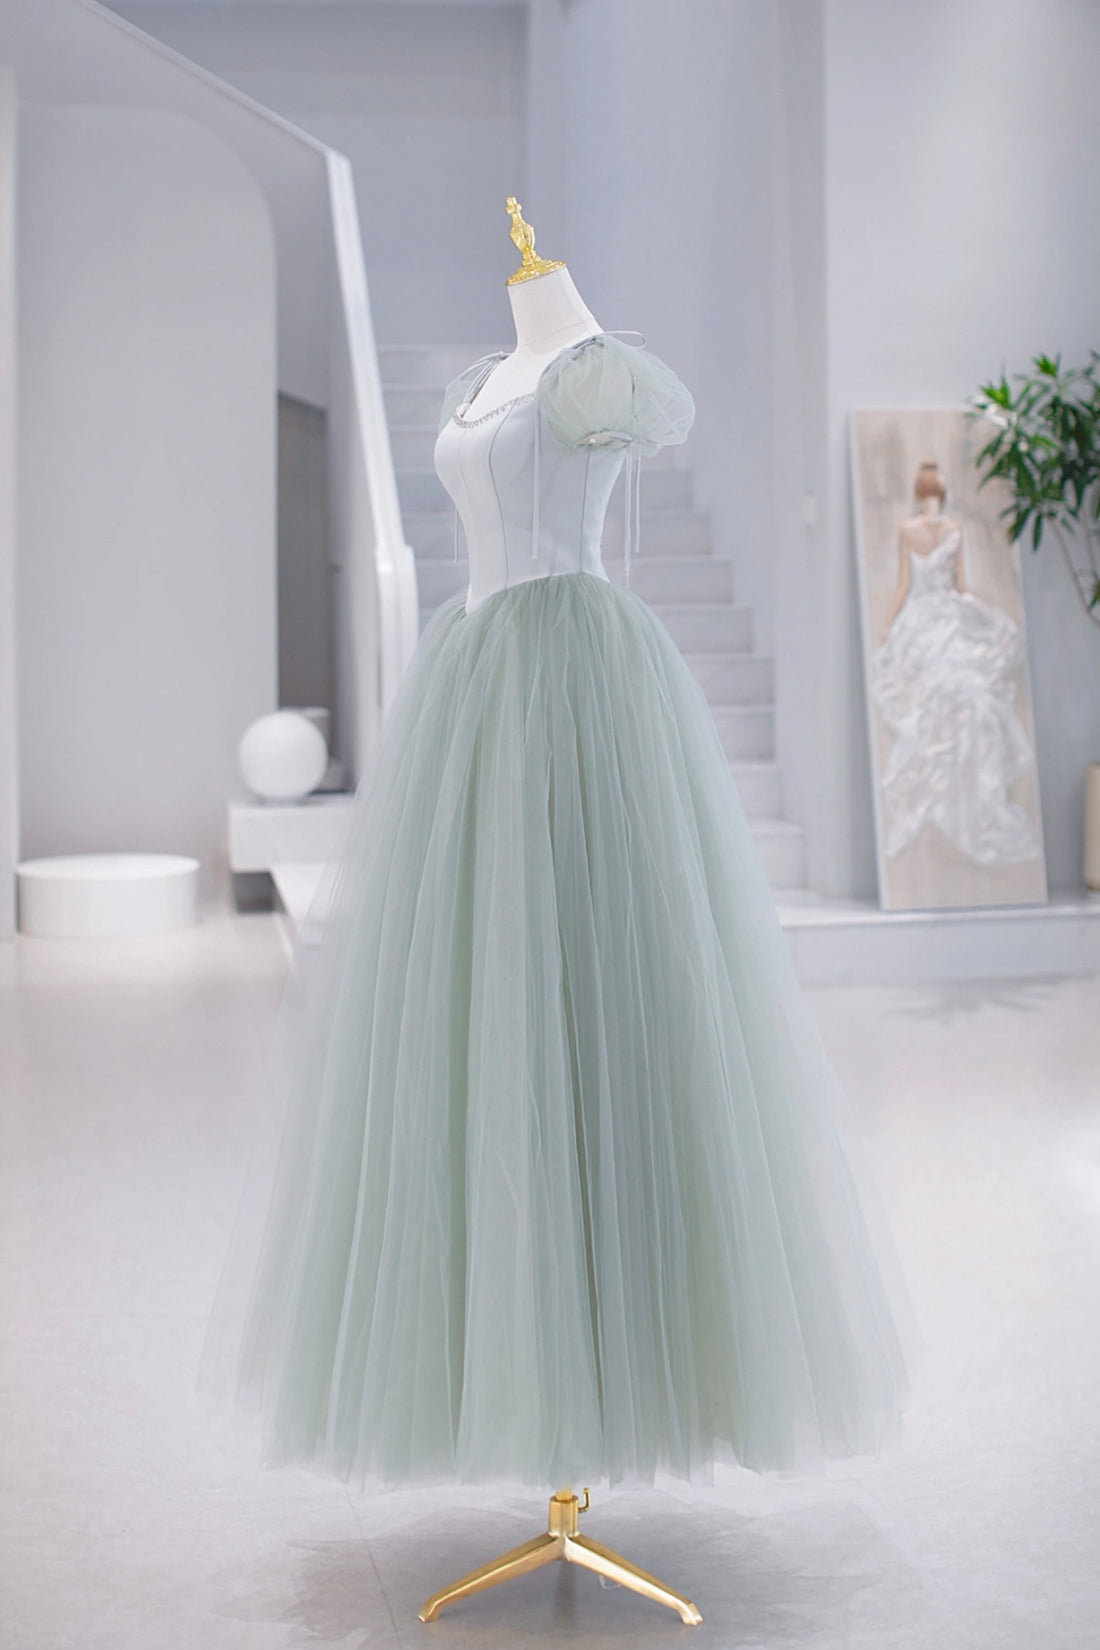 Lovely Tulle Floor Length Prom Dress, A-Line Short Sleeve Evening Party Dress